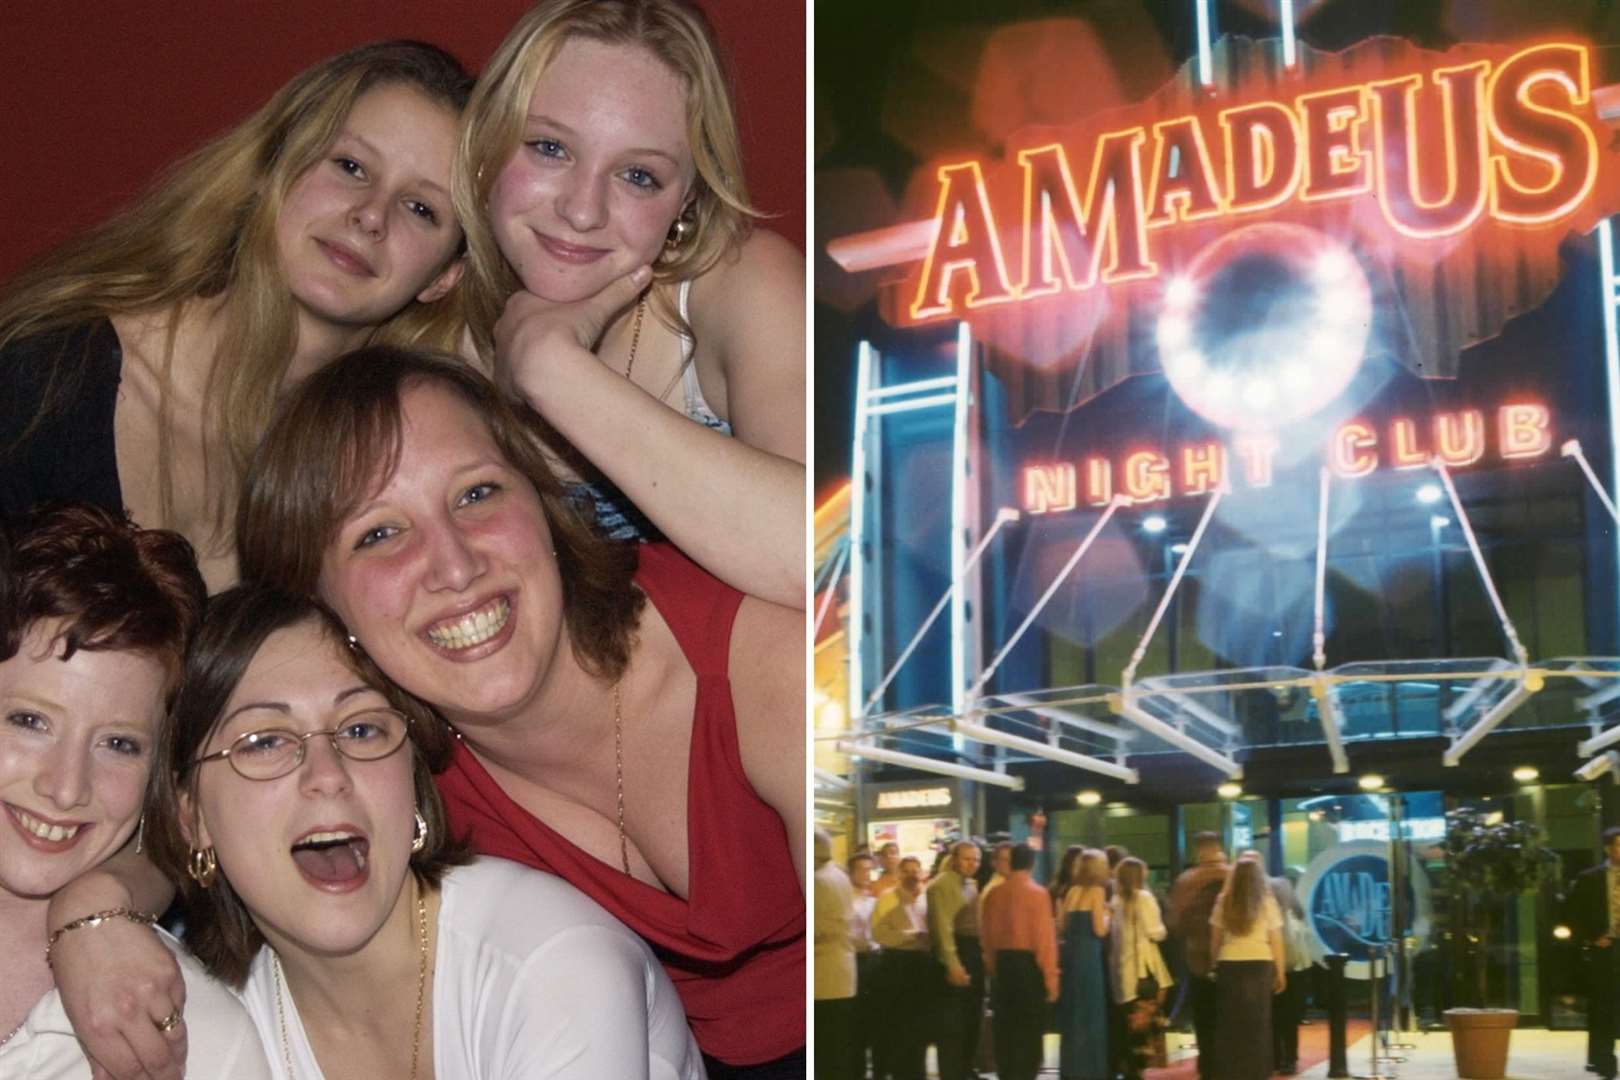 Revellers at Source of Sound in Tonbridge and outside Amadeus in Strood